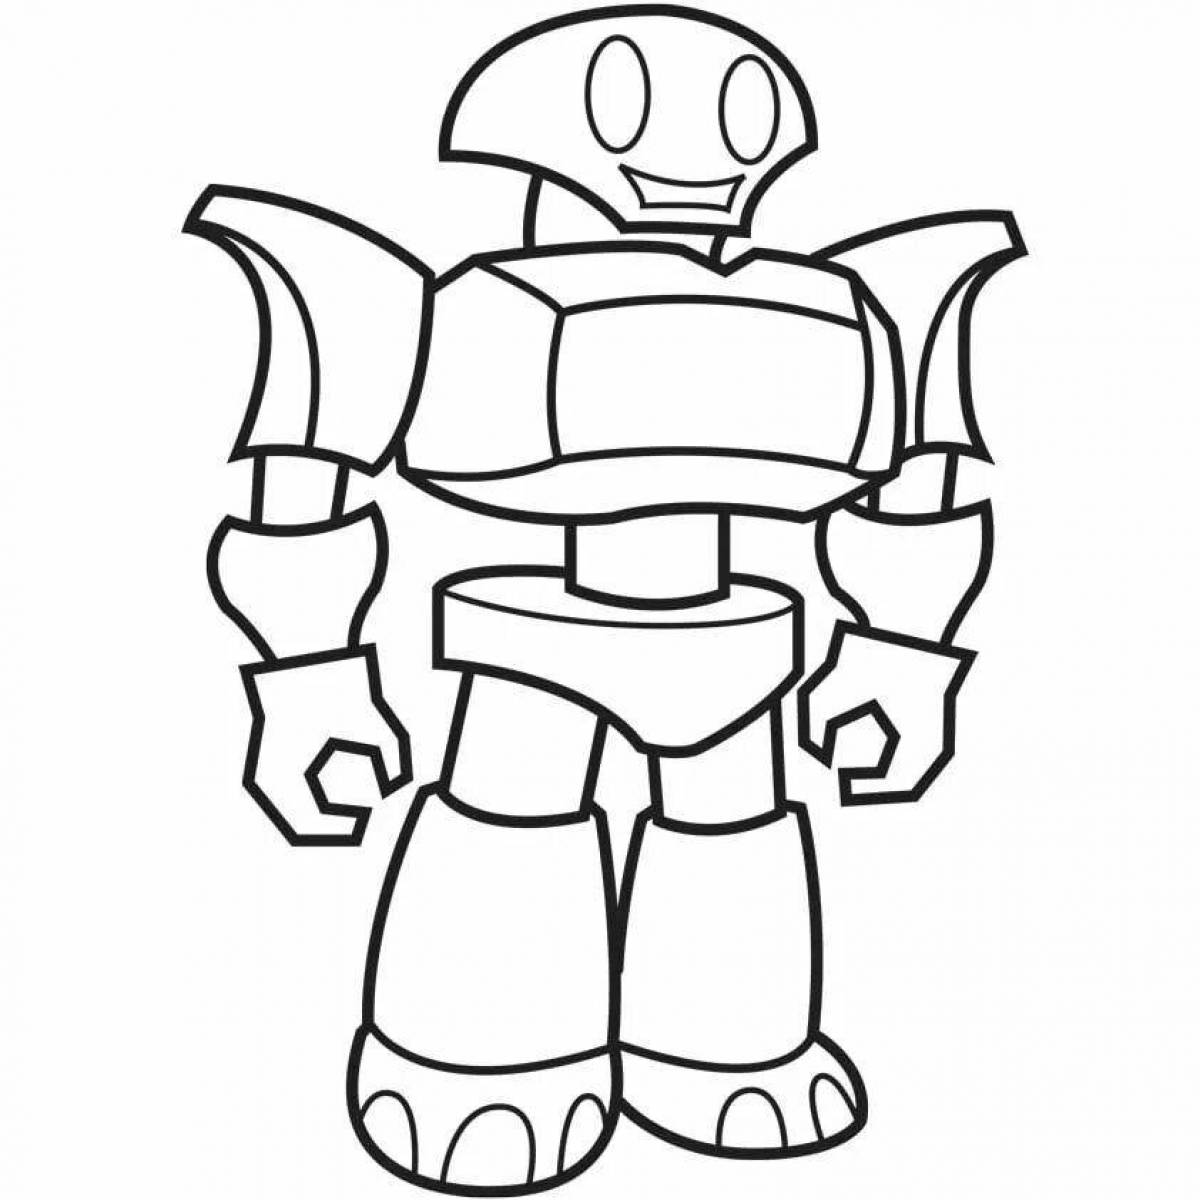 Living robot coloring book for kids